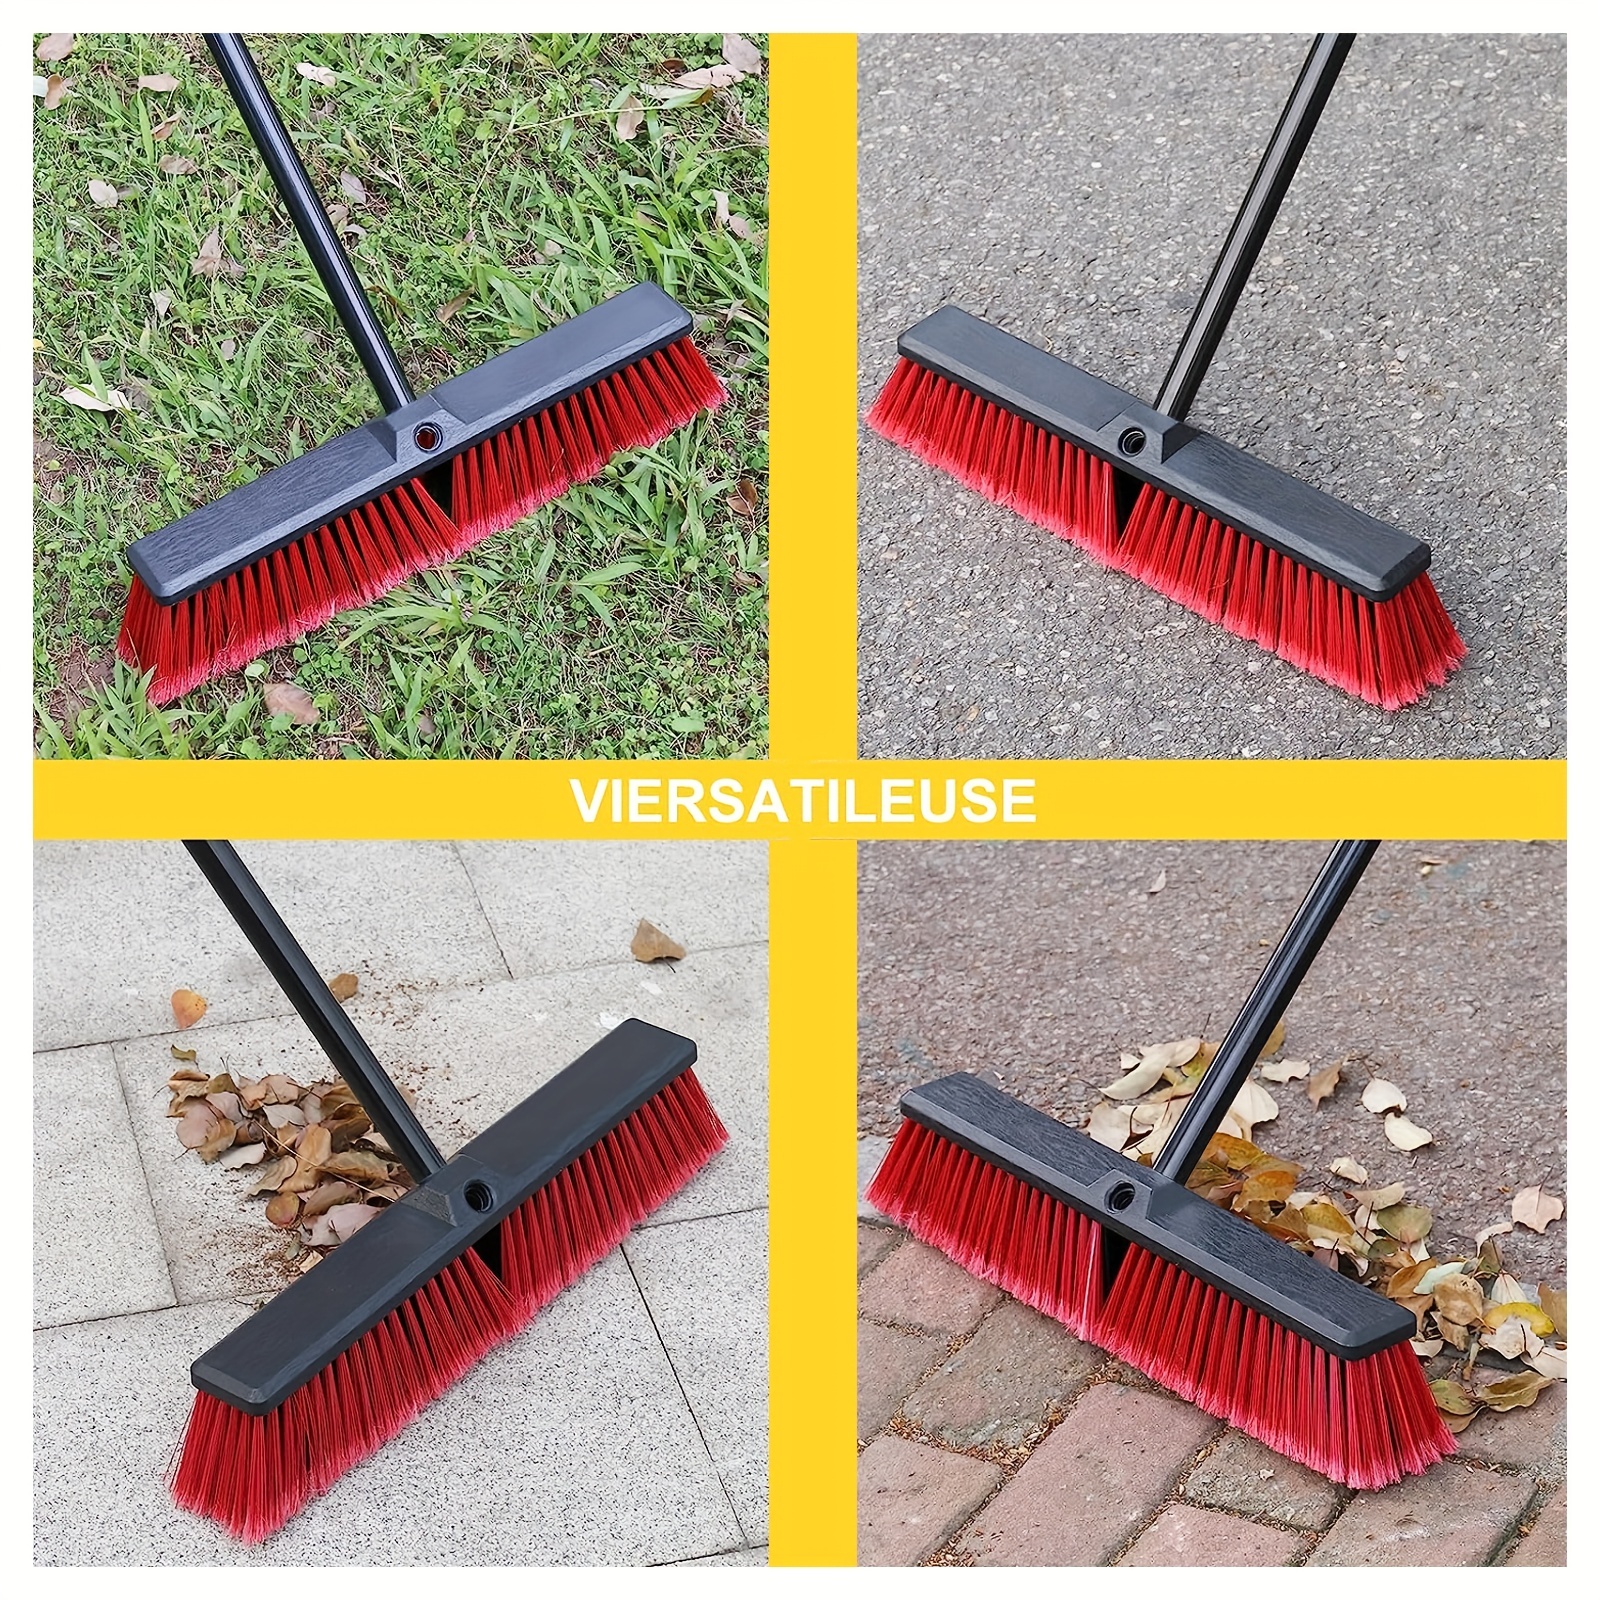  Push Broom Stiff Indoor Outdoor Rough Surface Floor Scrub Brush  17.7 inches Wide 61.8 inches Long Handle Stainless Steel, for Cleaning  Bathroom Kitchen Patio Garage Deck Concrete Wood Stone Tile Floor 